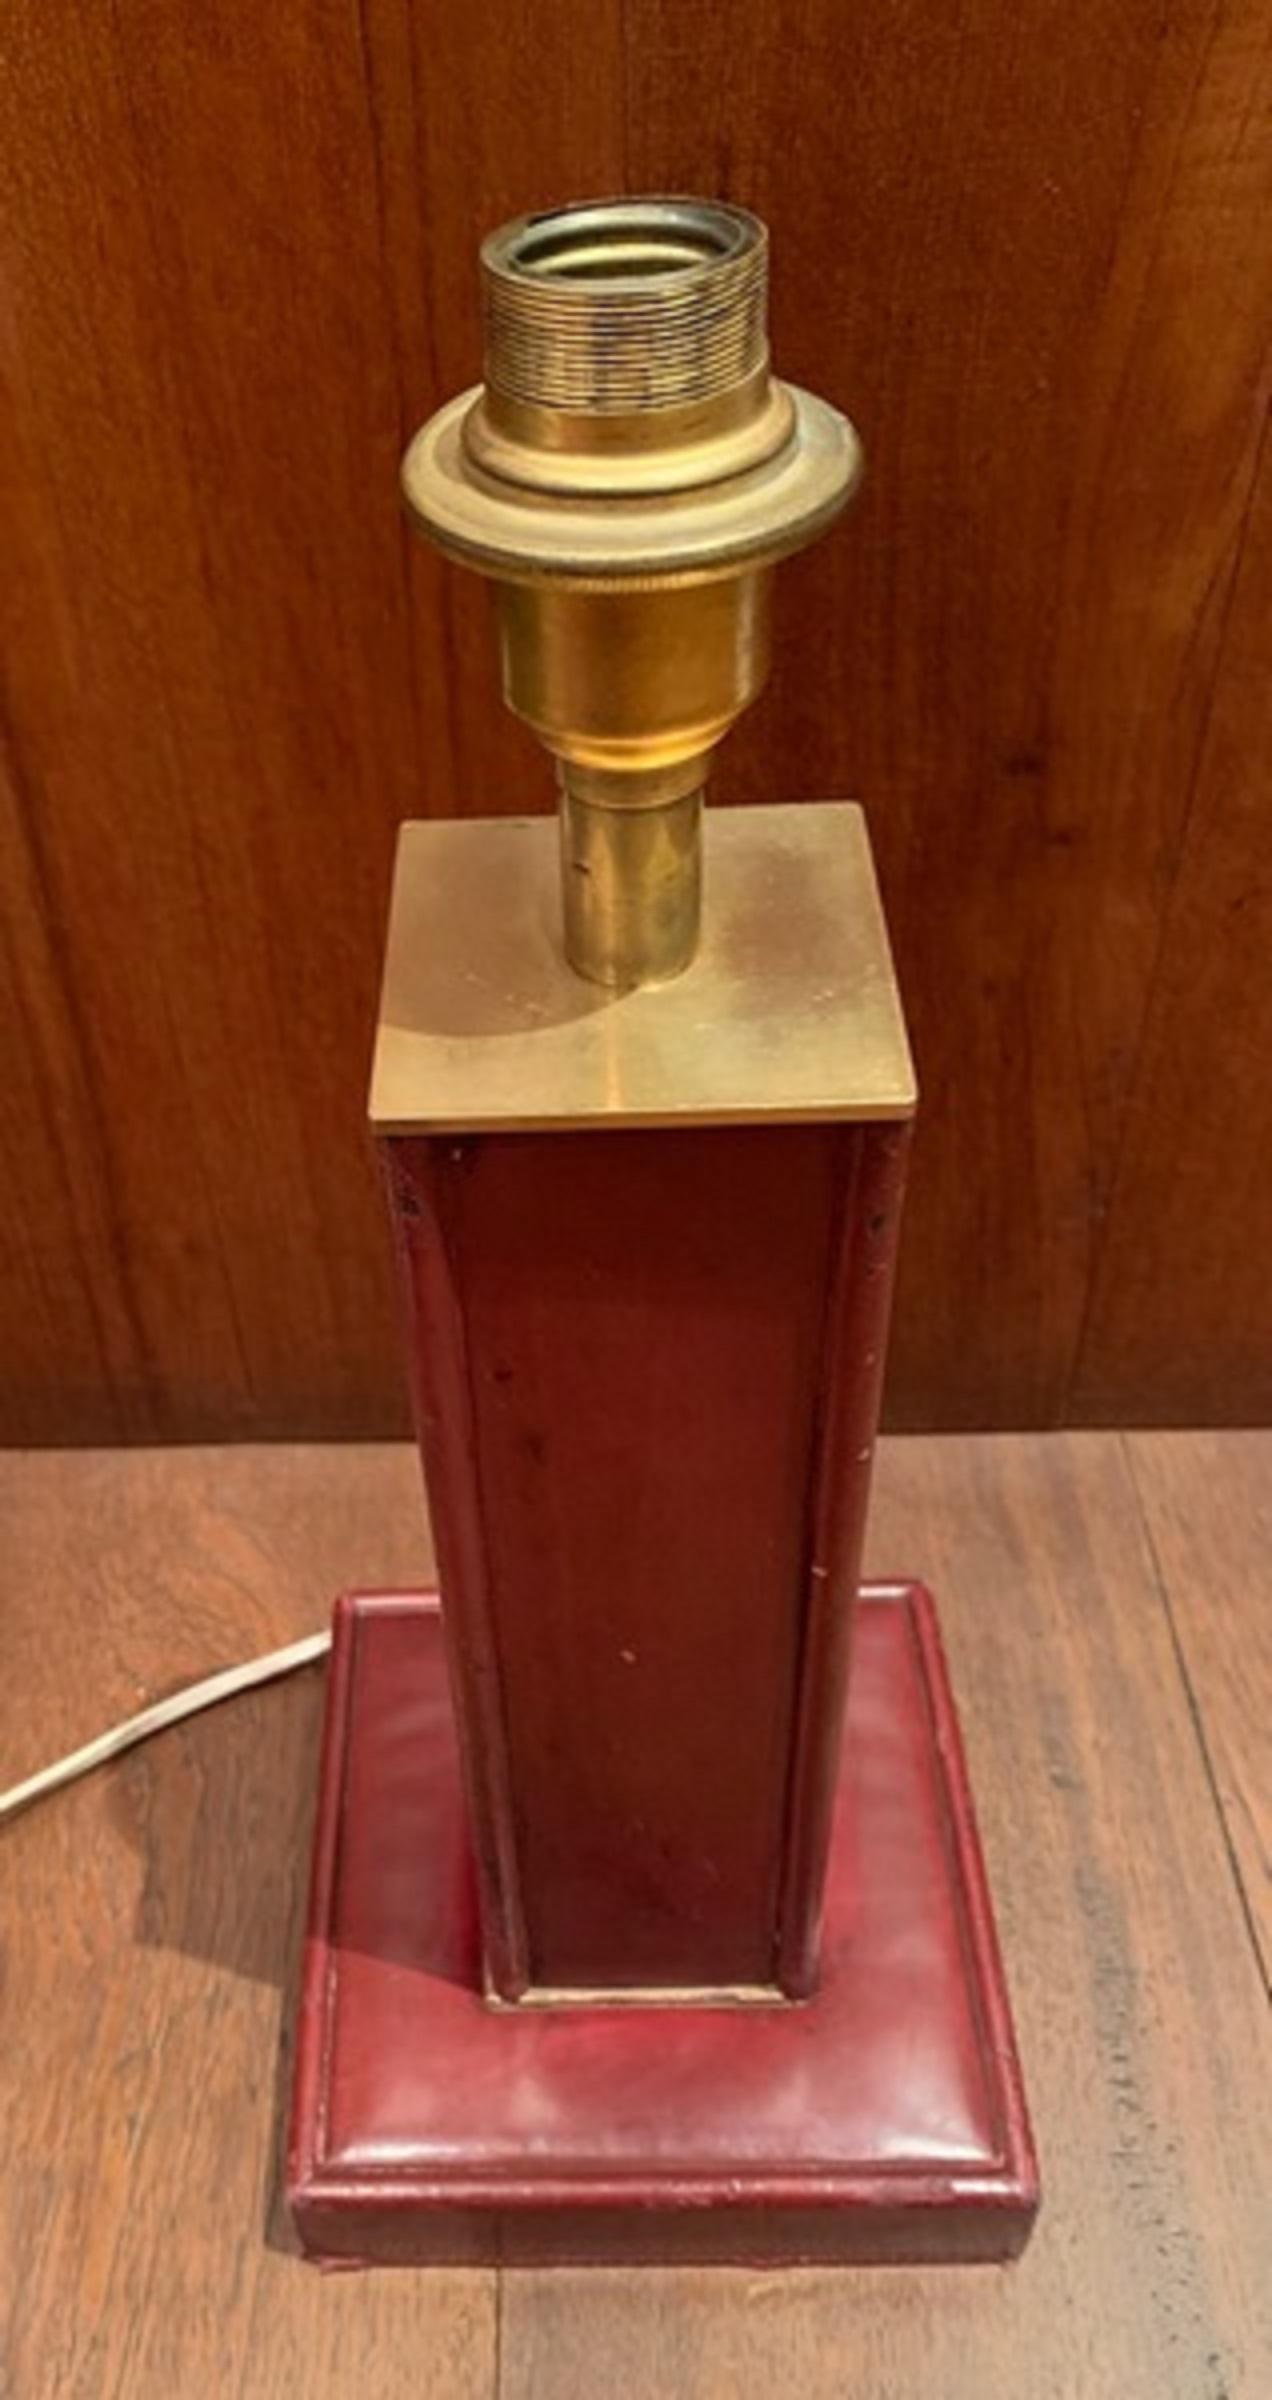 Lamp entirely sheathed in saddle-stitch burgundy leather with a quadrangular shaft resting on a rectangular base
Dupre Lafon 1940
Height without the sleeve: 31 cm.
Base: 16cm X 16cm.
Barrel: 7.5 cm X 7.5 cm.